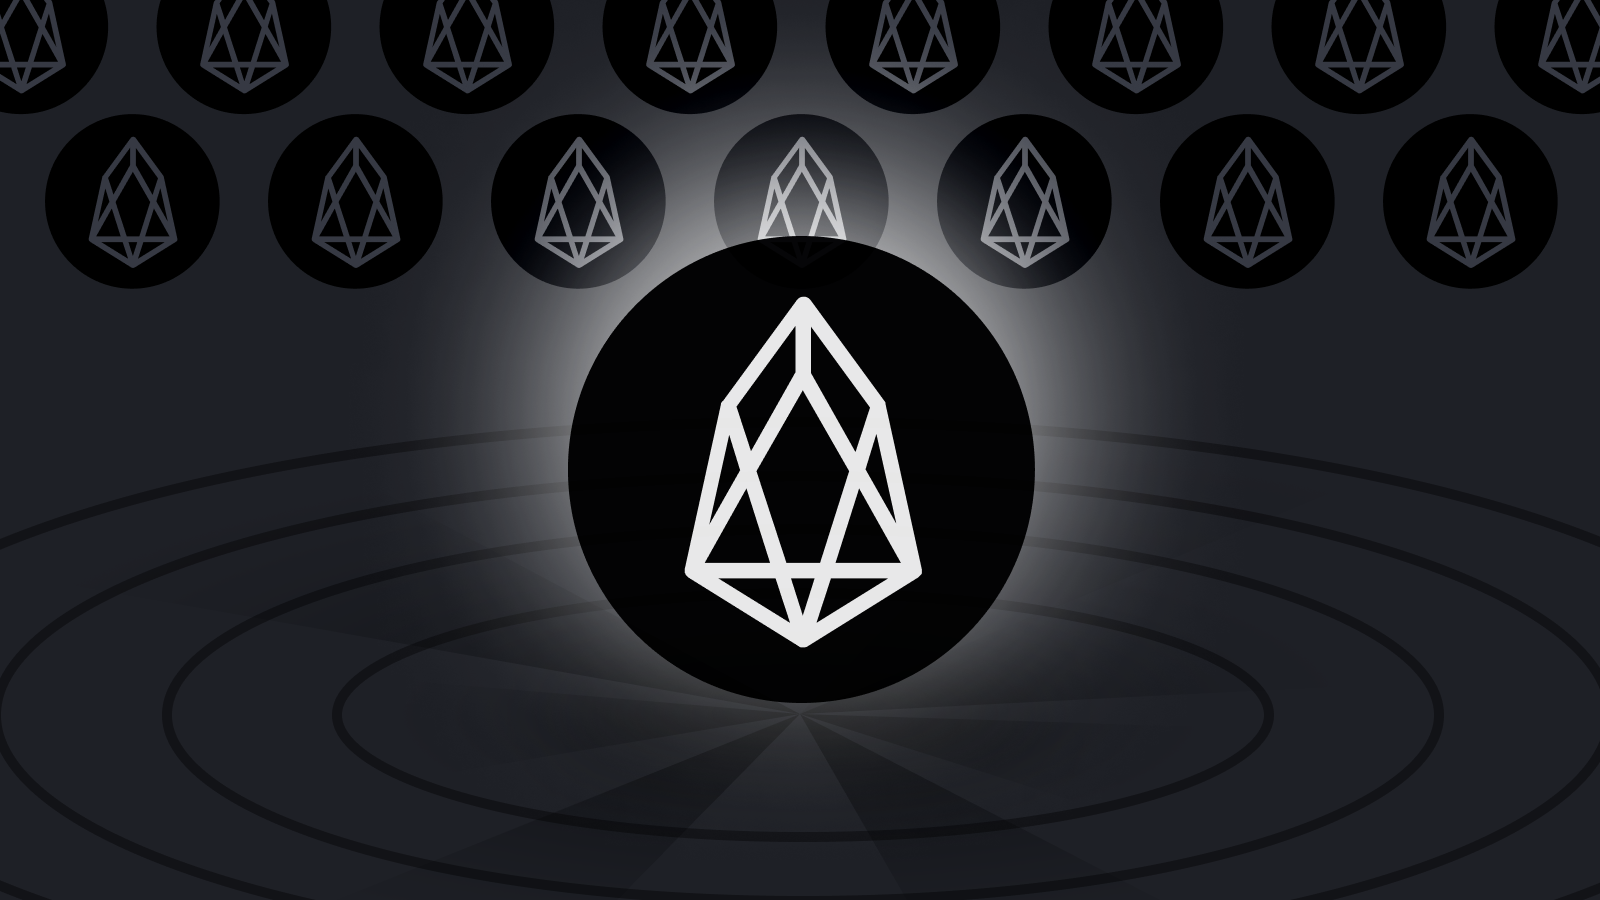 EOS Price Prediction: EOS Surges 8%, But Investors Flock To This World-First AR/VR Presale For 100X Potential